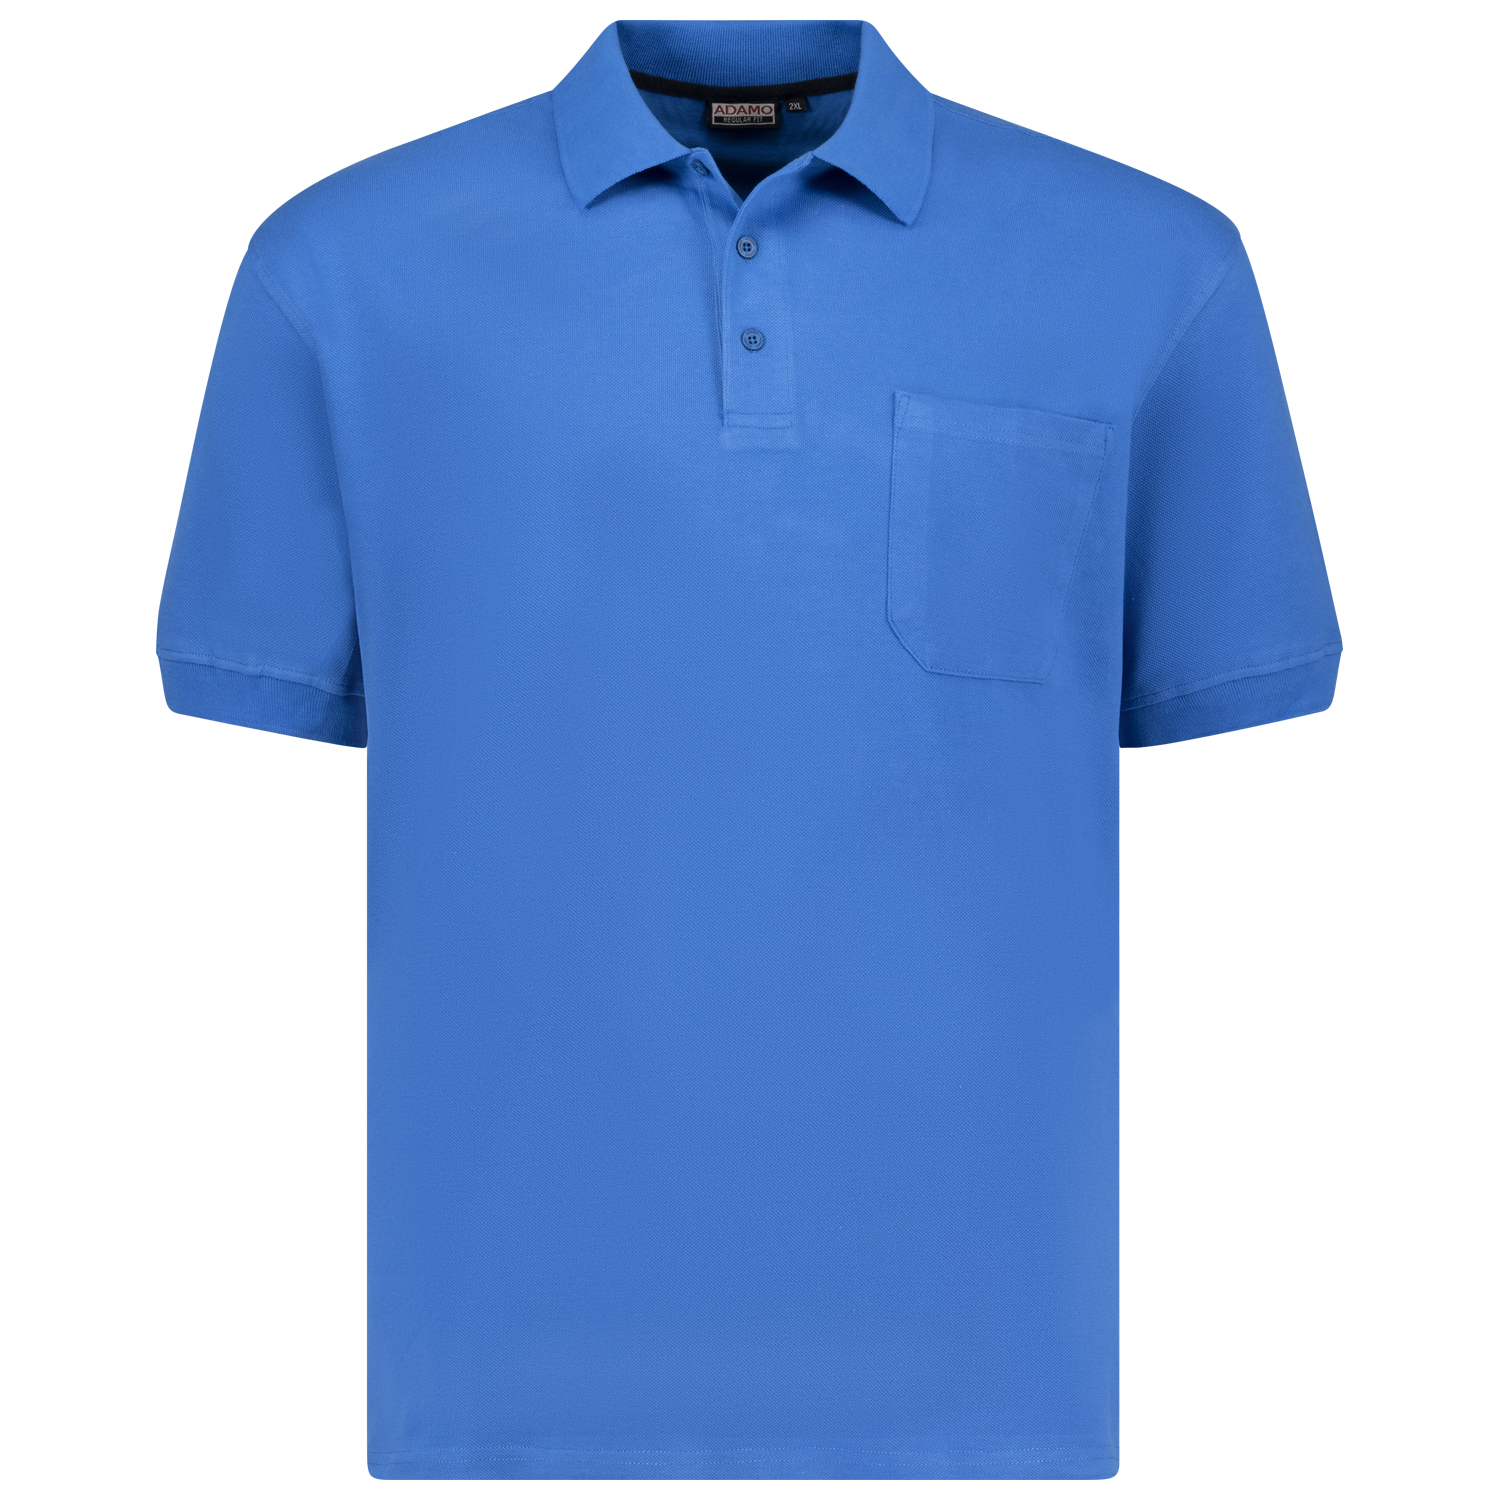 Short sleeve polo shirt REGULAR FIT series Keno by Adamo in azure up to oversize 10XL